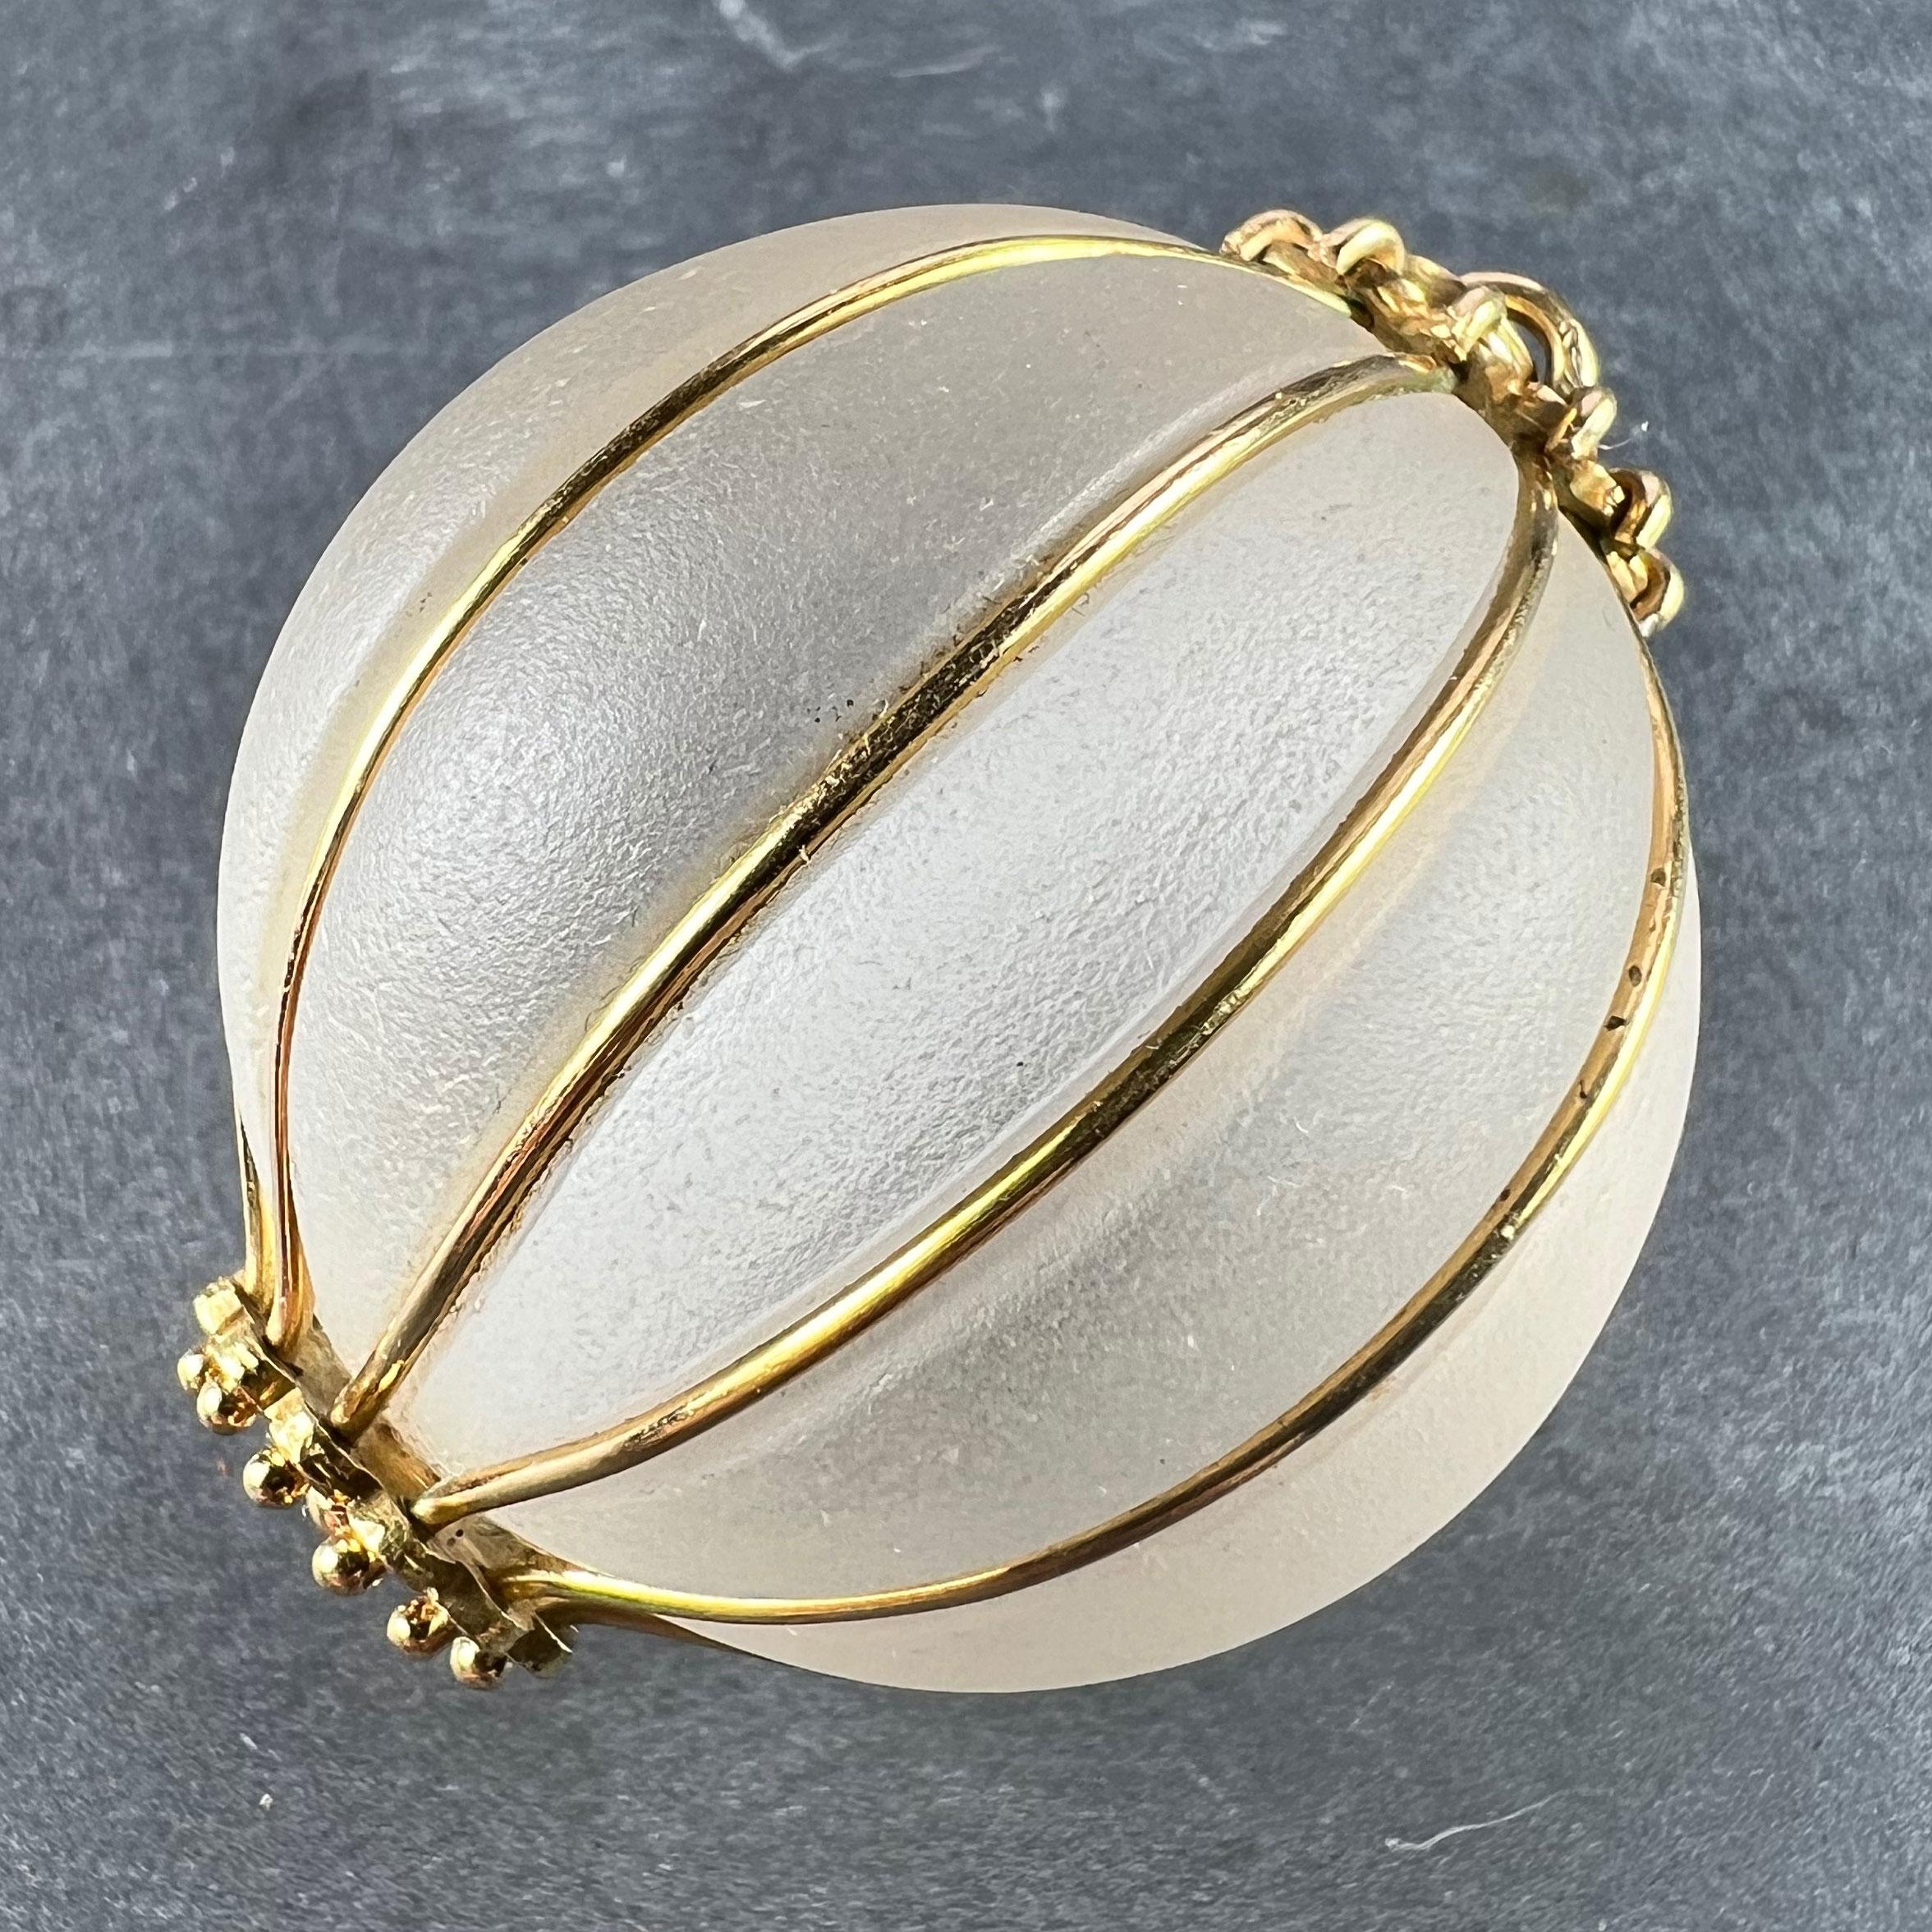 A huge spherical pendant designed as an enormous frosted glass gadrooned sphere with 12 raised and curved segments separated and defined by 18 karat (18K) yellow gold wires to decorative finials at each end. Stamped with the owl mark for French